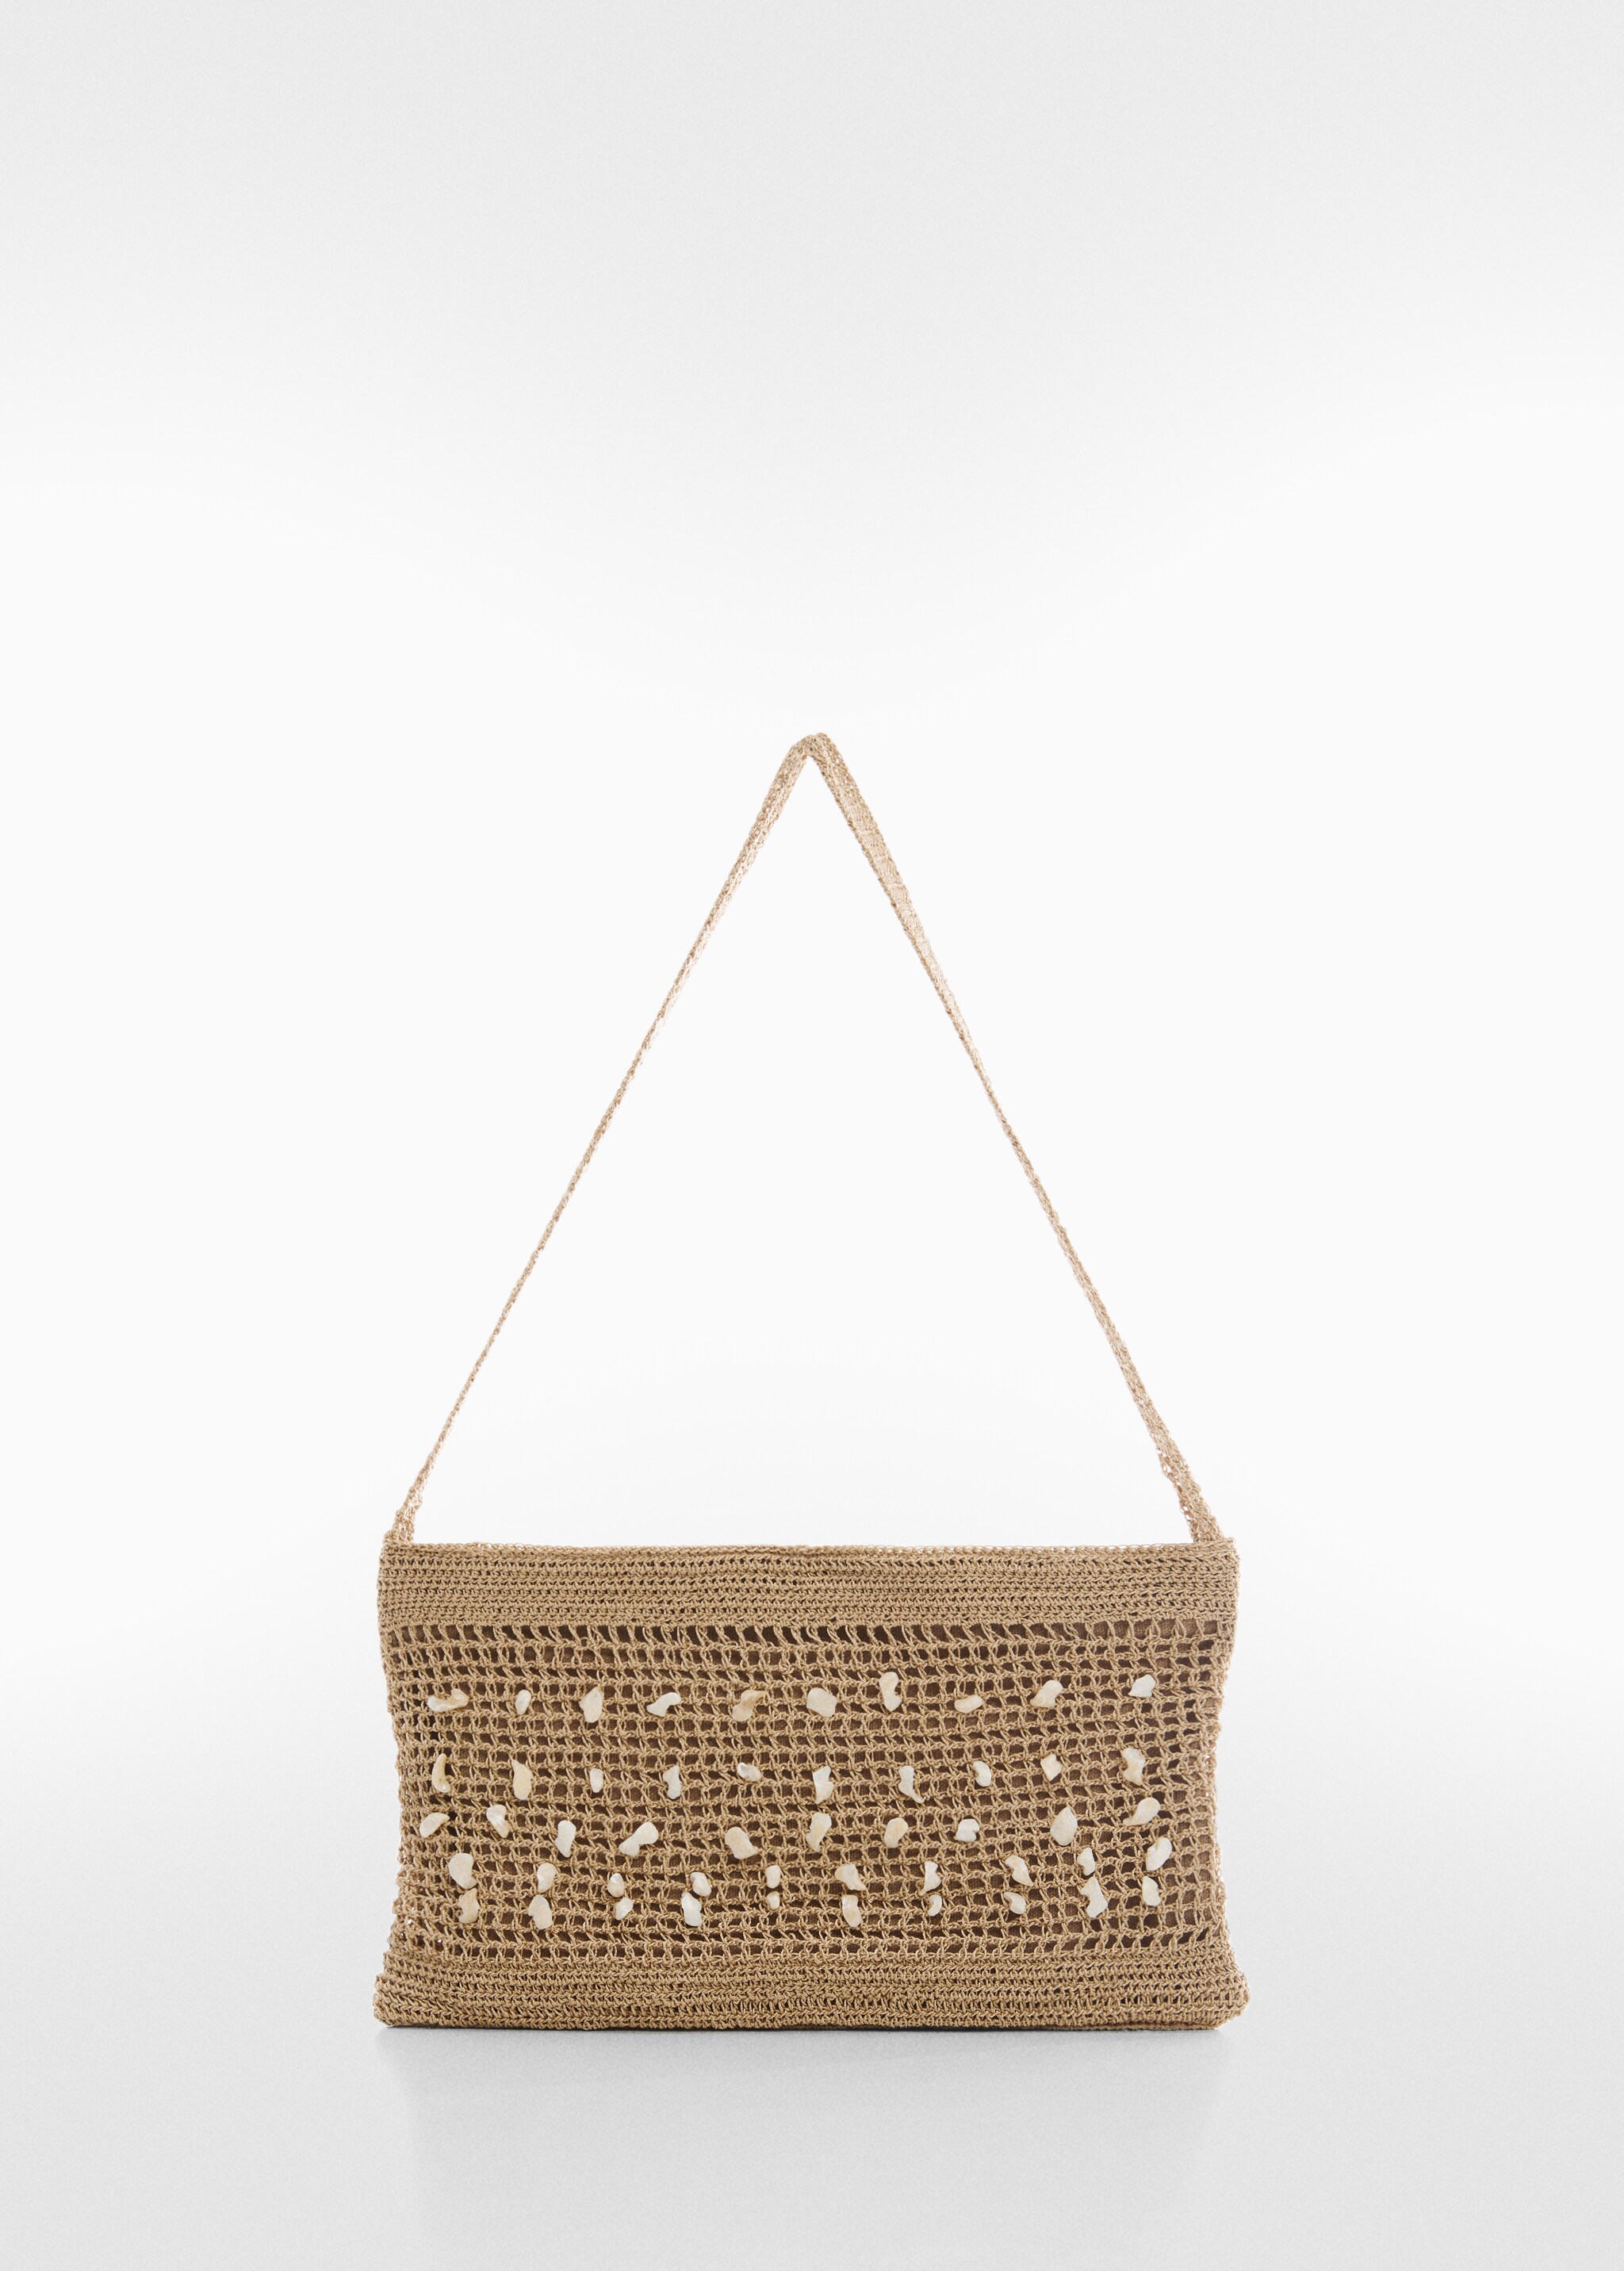 Crochet bag with shell detail - Article without model